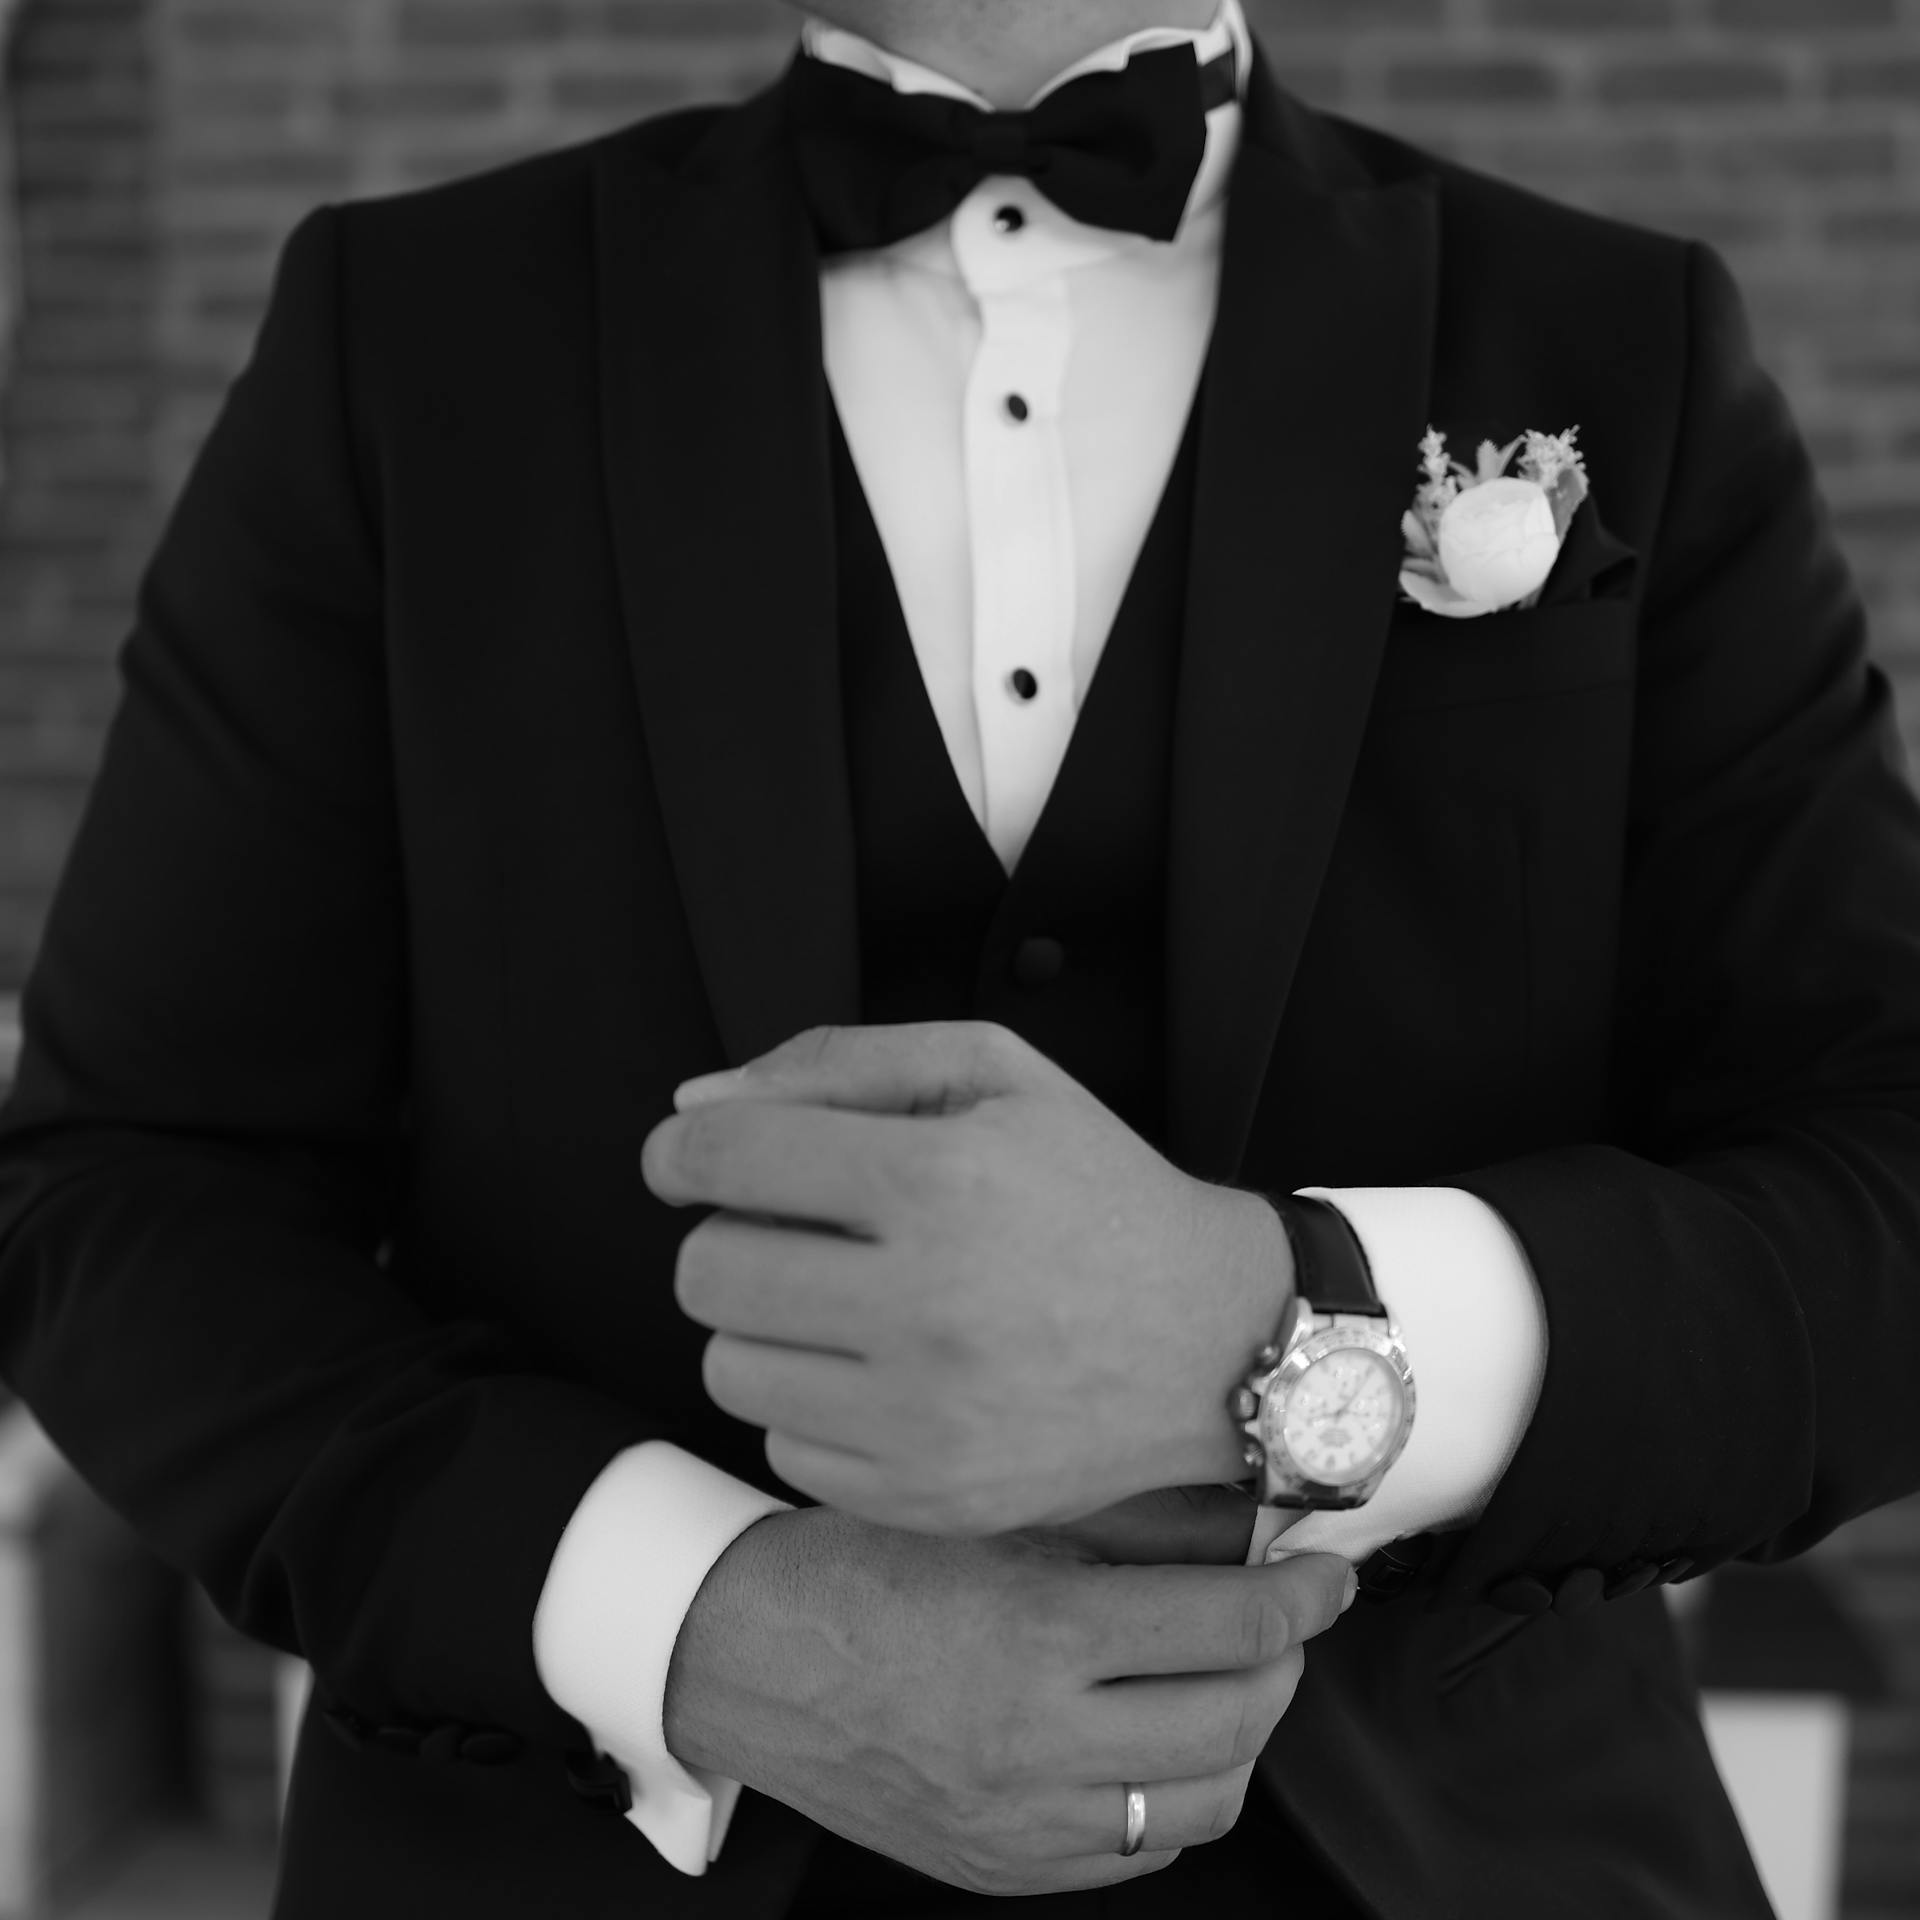 A groom at the altar | Source: Pexels